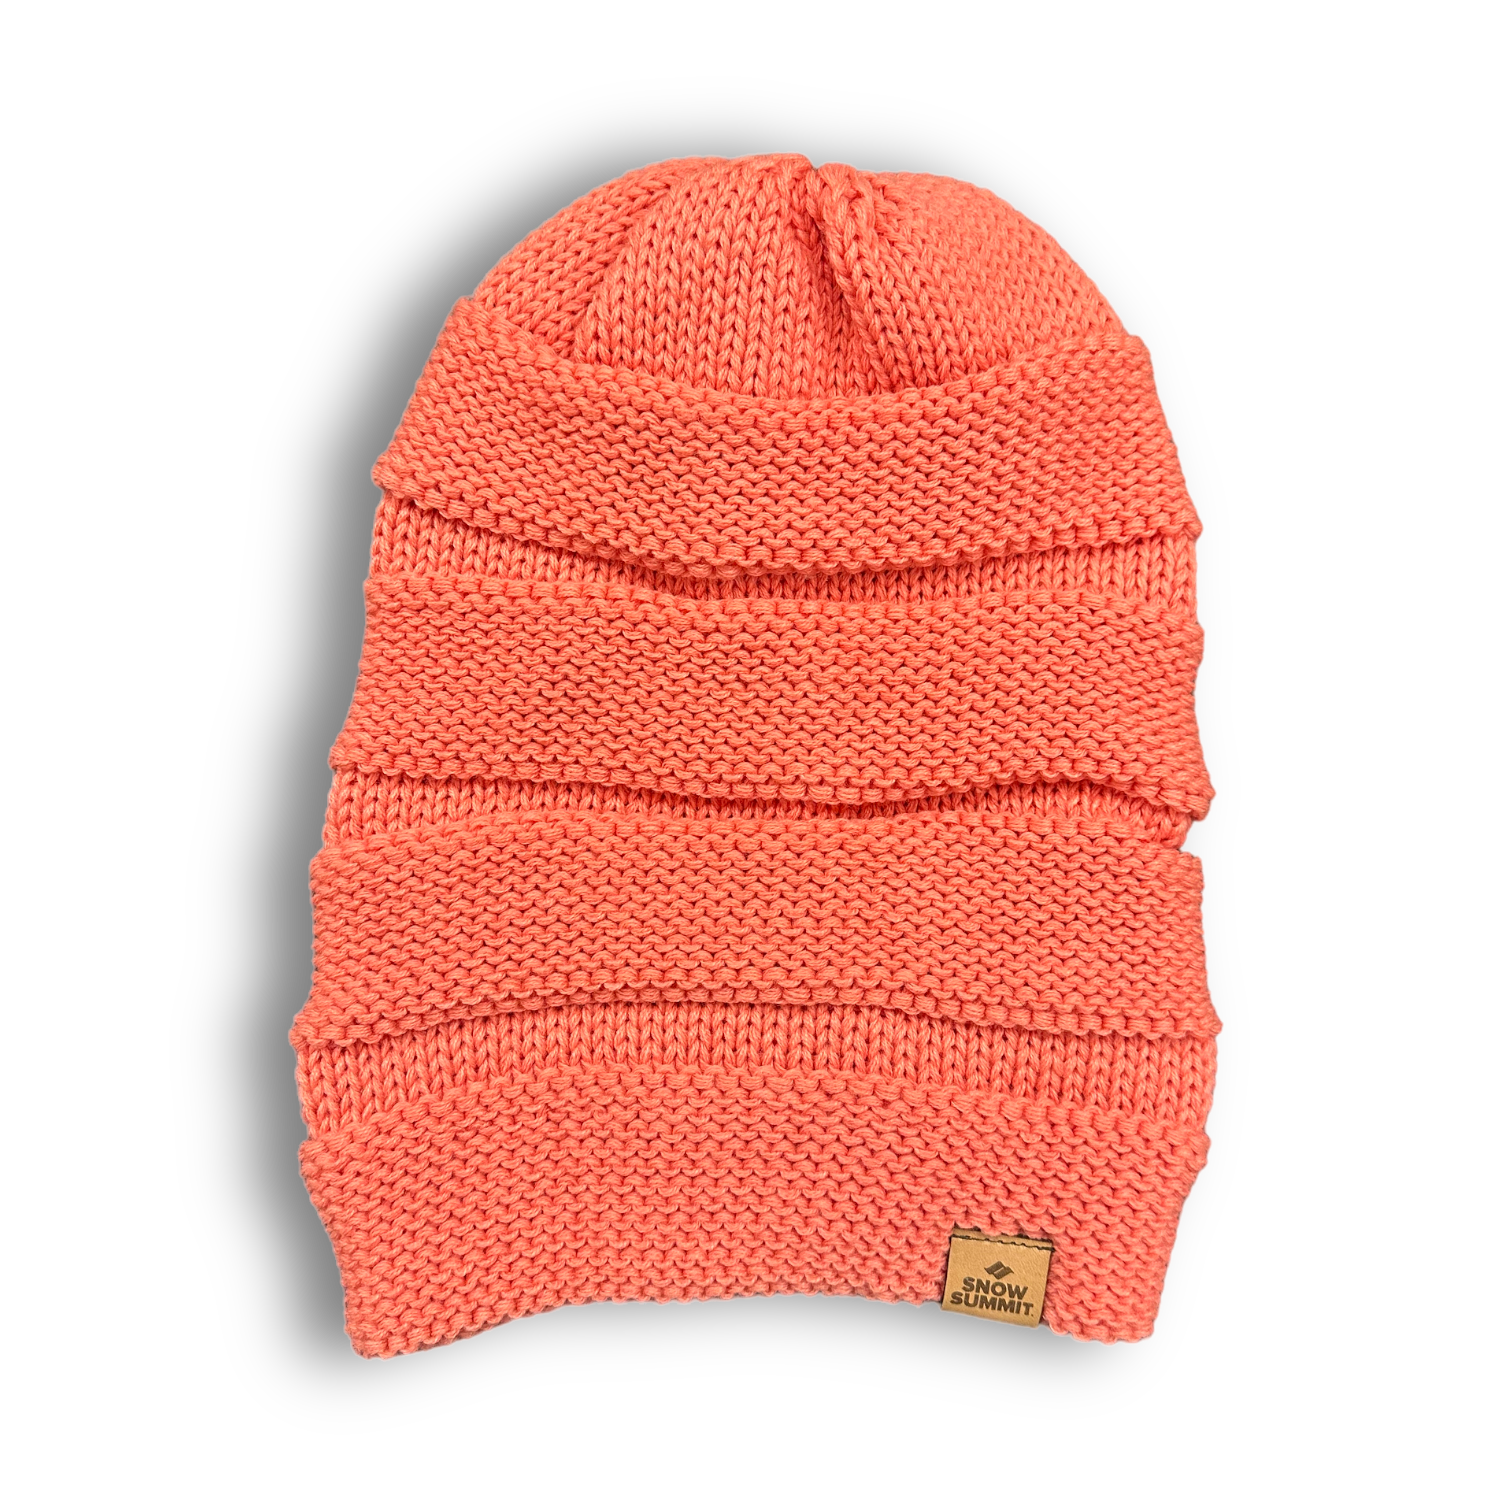 snow summit slouch beanie in coral color with logo on bottom left corner